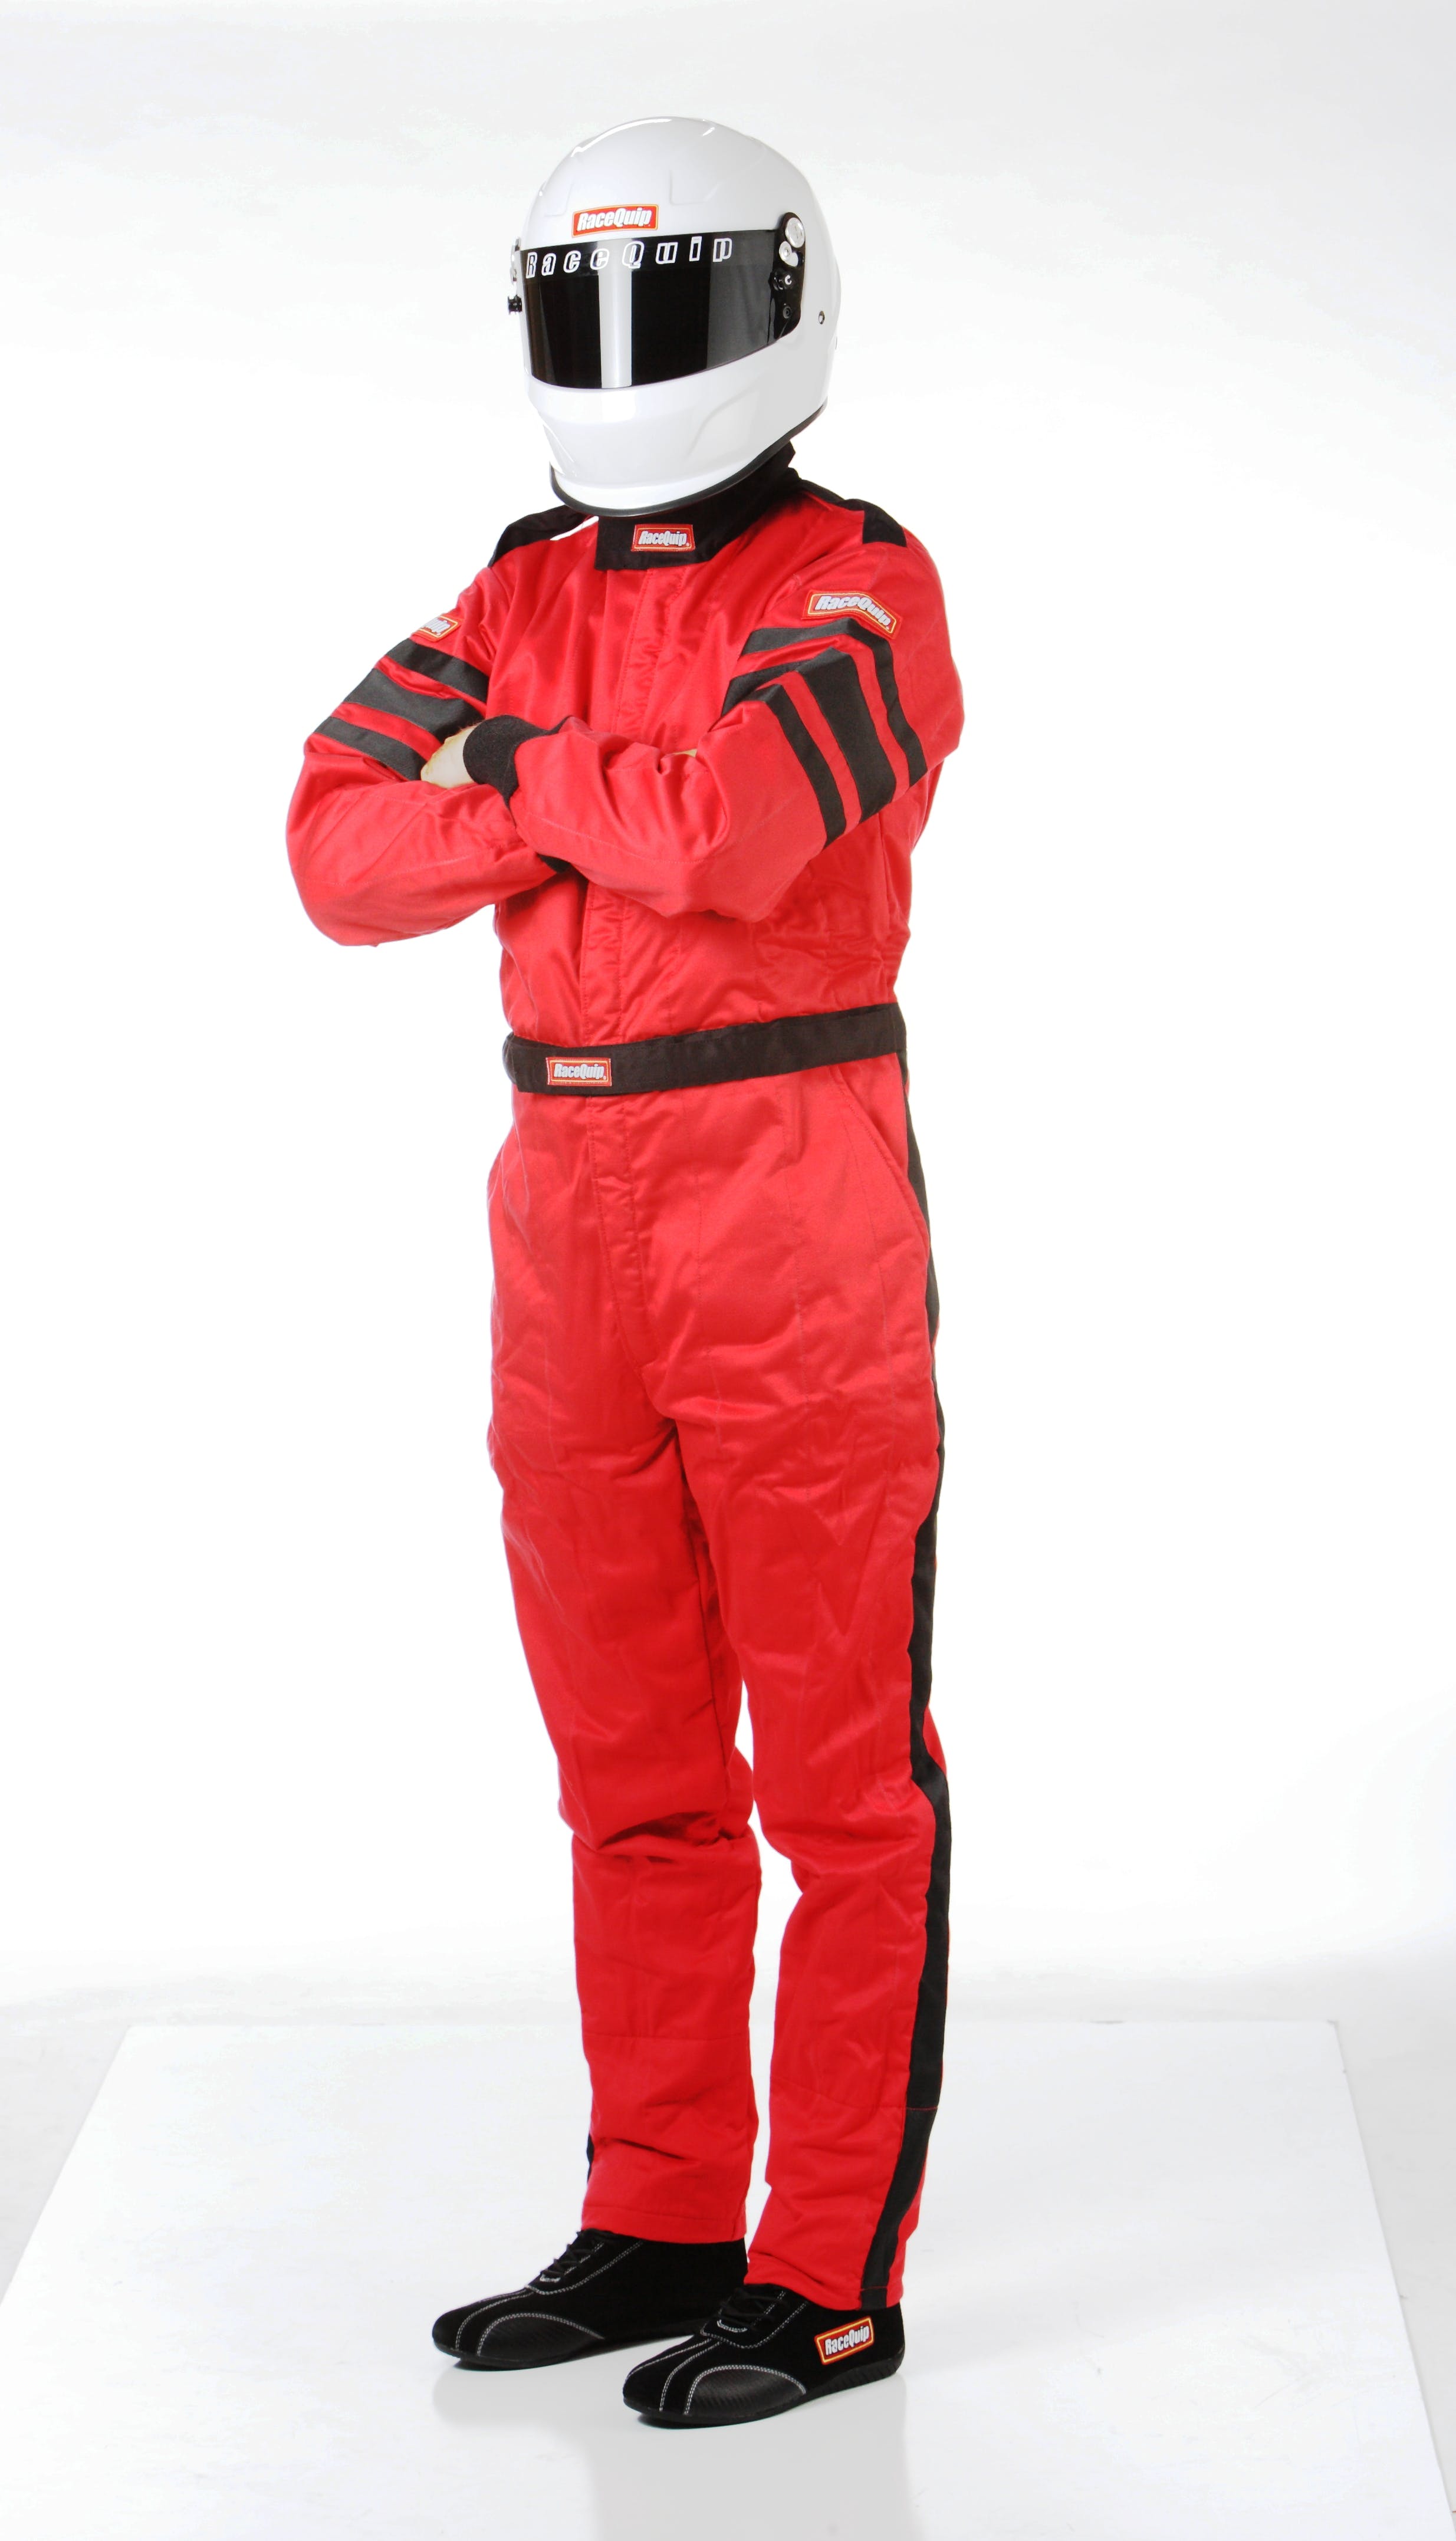 RaceQuip 120018 SFI-5 Pyrovatex One-Piece Multi-Layer Racing Fire Suit (Red, 3X-Large)